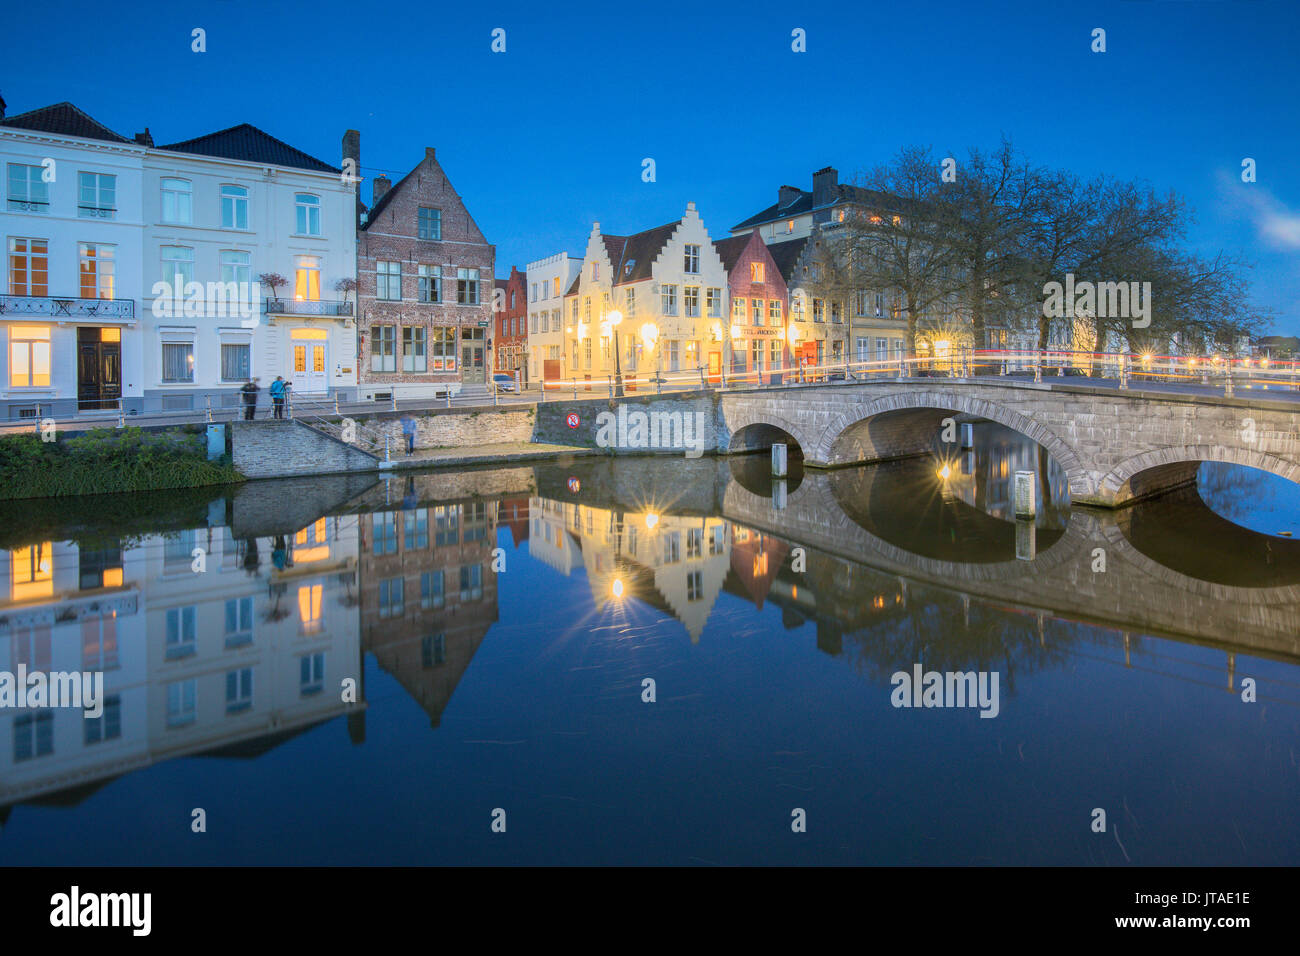 Dusk lights on the historic buildings of the city centre reflected in typical canals, Bruges, West Flanders, Belgium, Europe Stock Photo